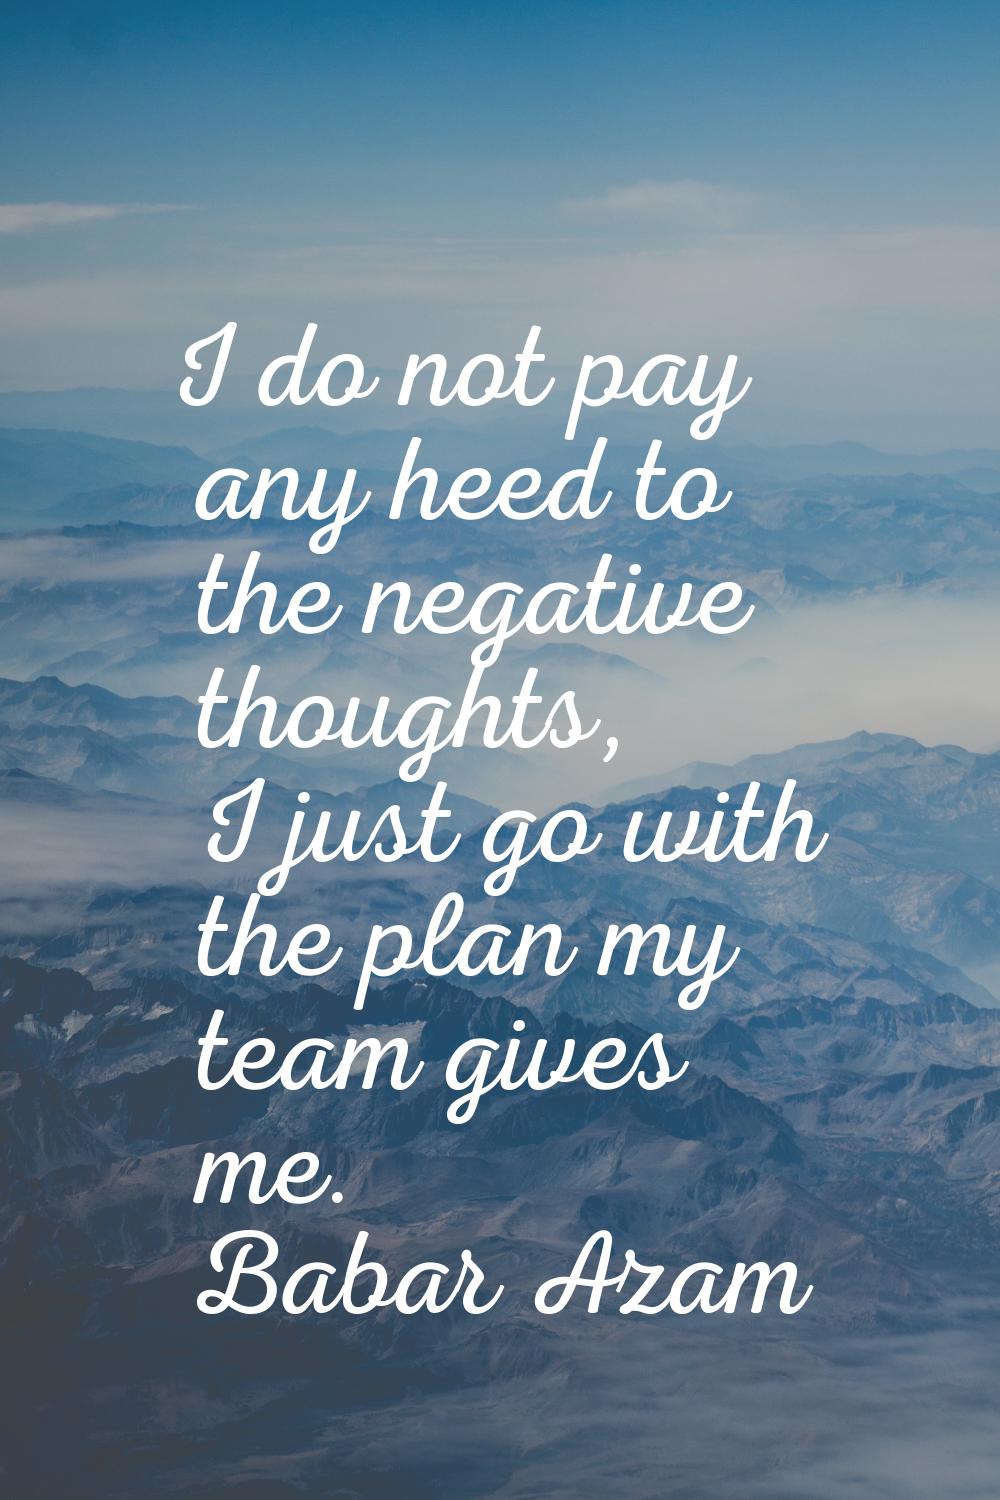 I do not pay any heed to the negative thoughts, I just go with the plan my team gives me.